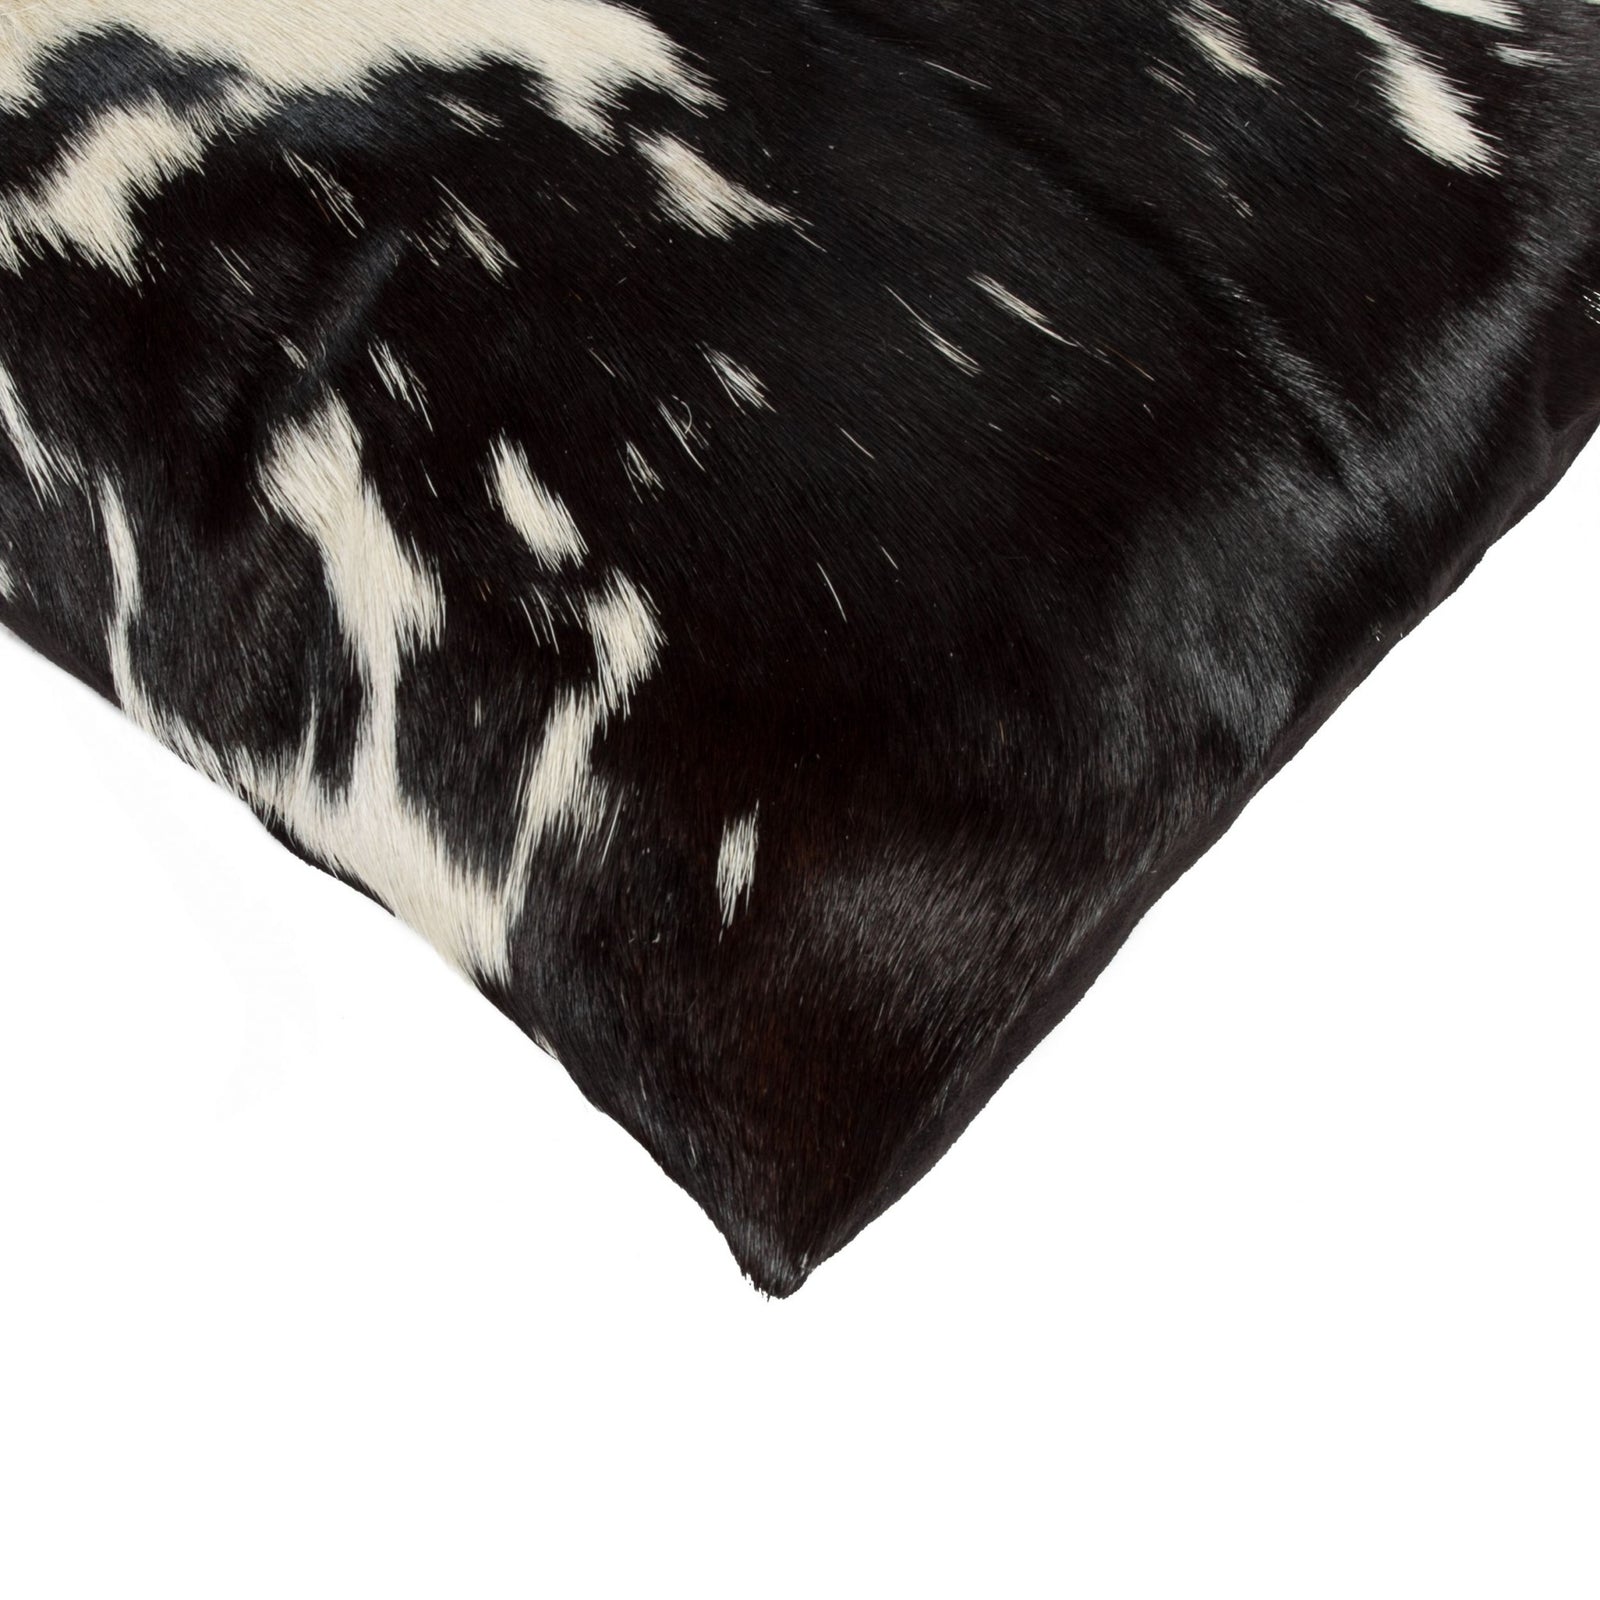 Black And White Cowhide Pillow - 18" x 18" x 5"